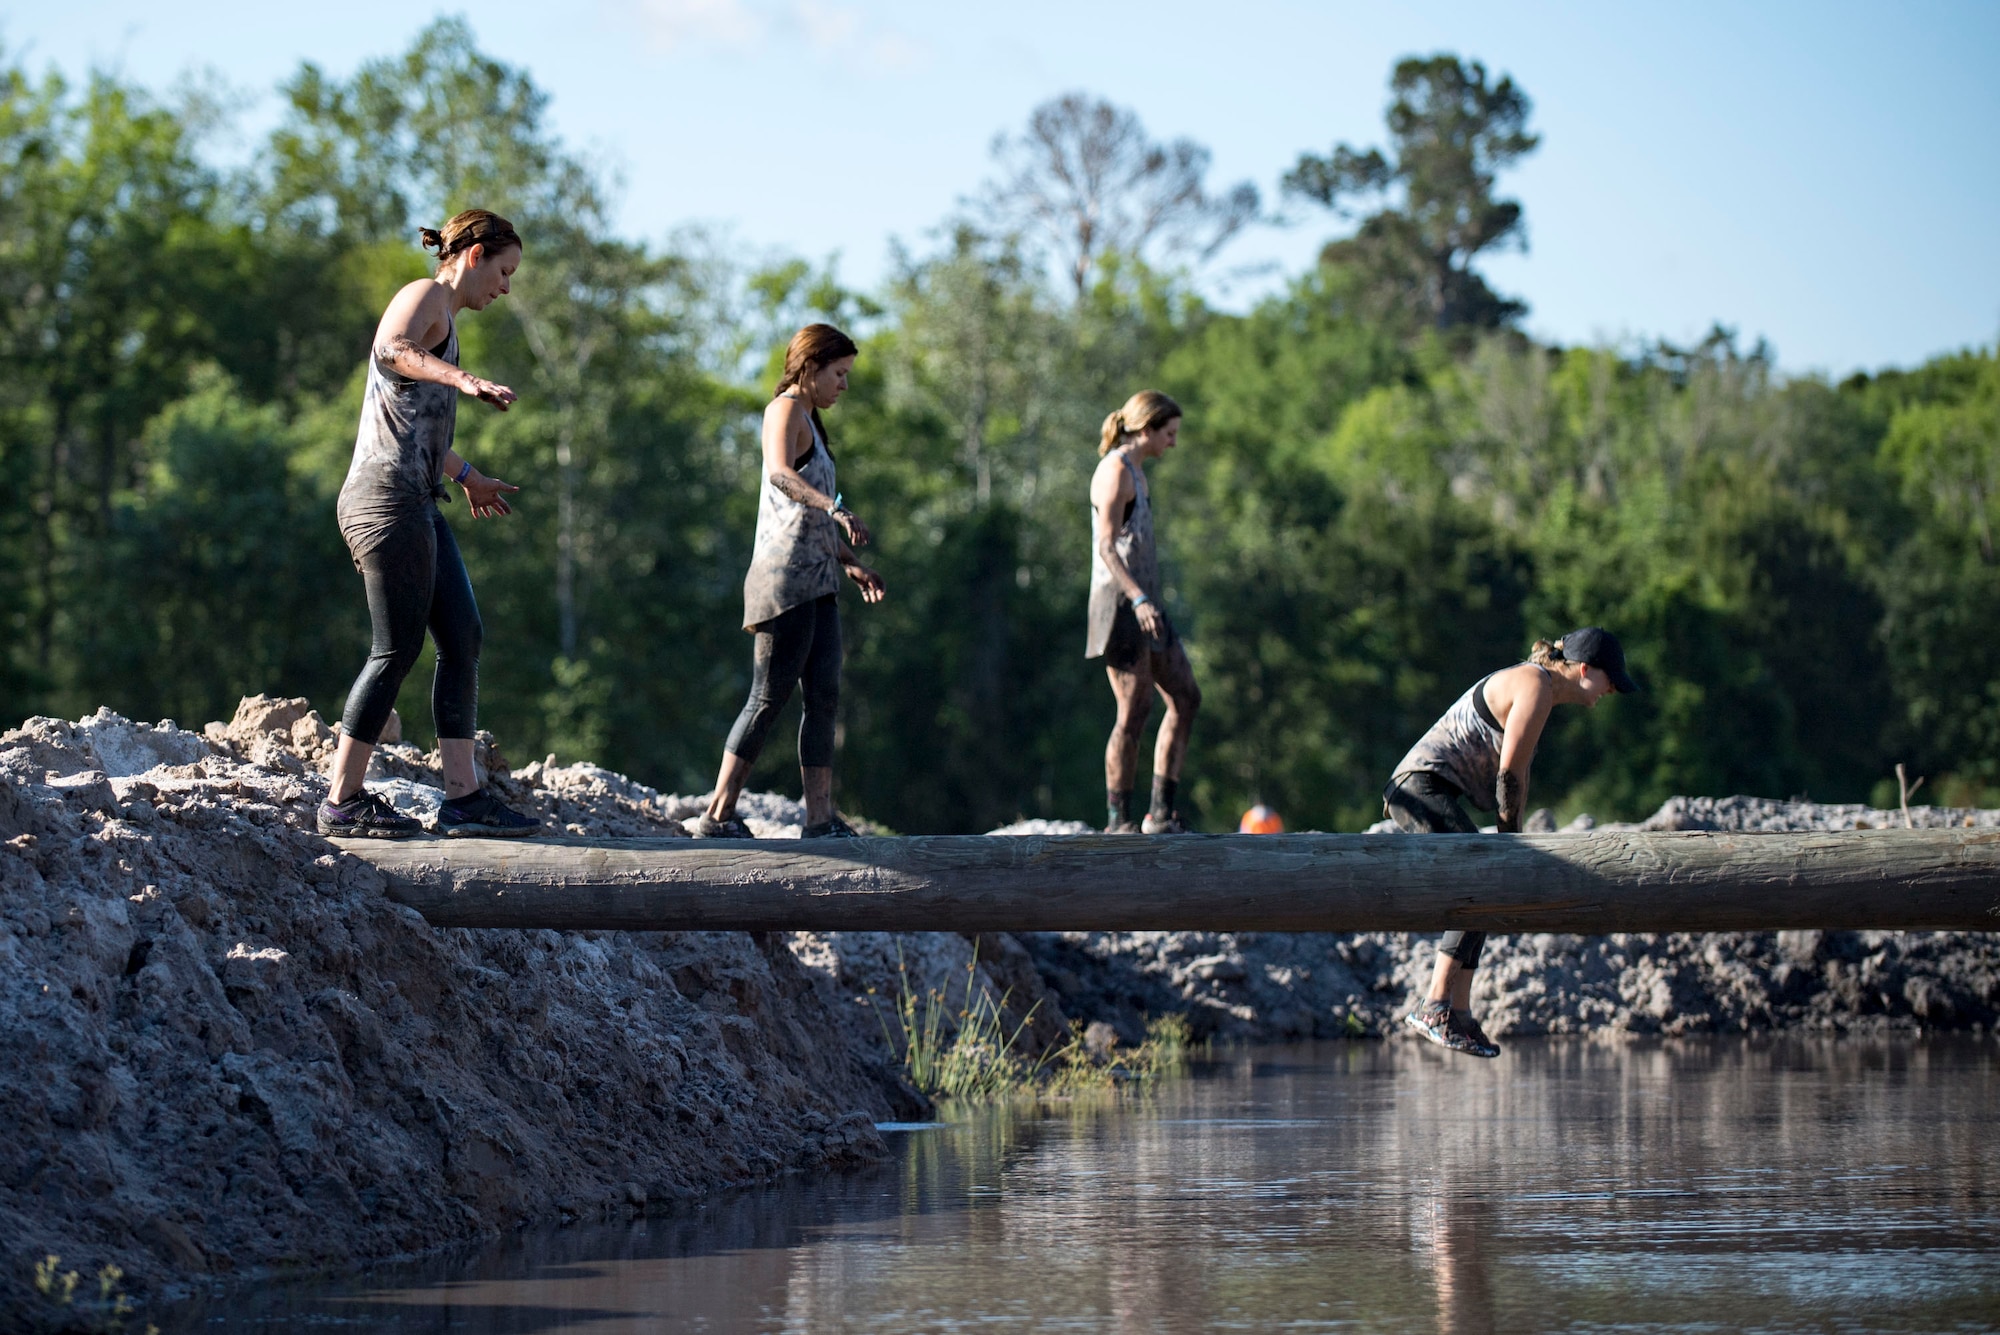 Participants attempt a log crossing during the annual Moody Mud Run, May 6, 2017, in Ray City, Ga. The Fourth Annual Moody Mud consisted of both adult and child course that challenged more than 600 participants with obstacles over 4.2 miles. (U.S. Air Force photo by Airman 1st Class Daniel Snider)